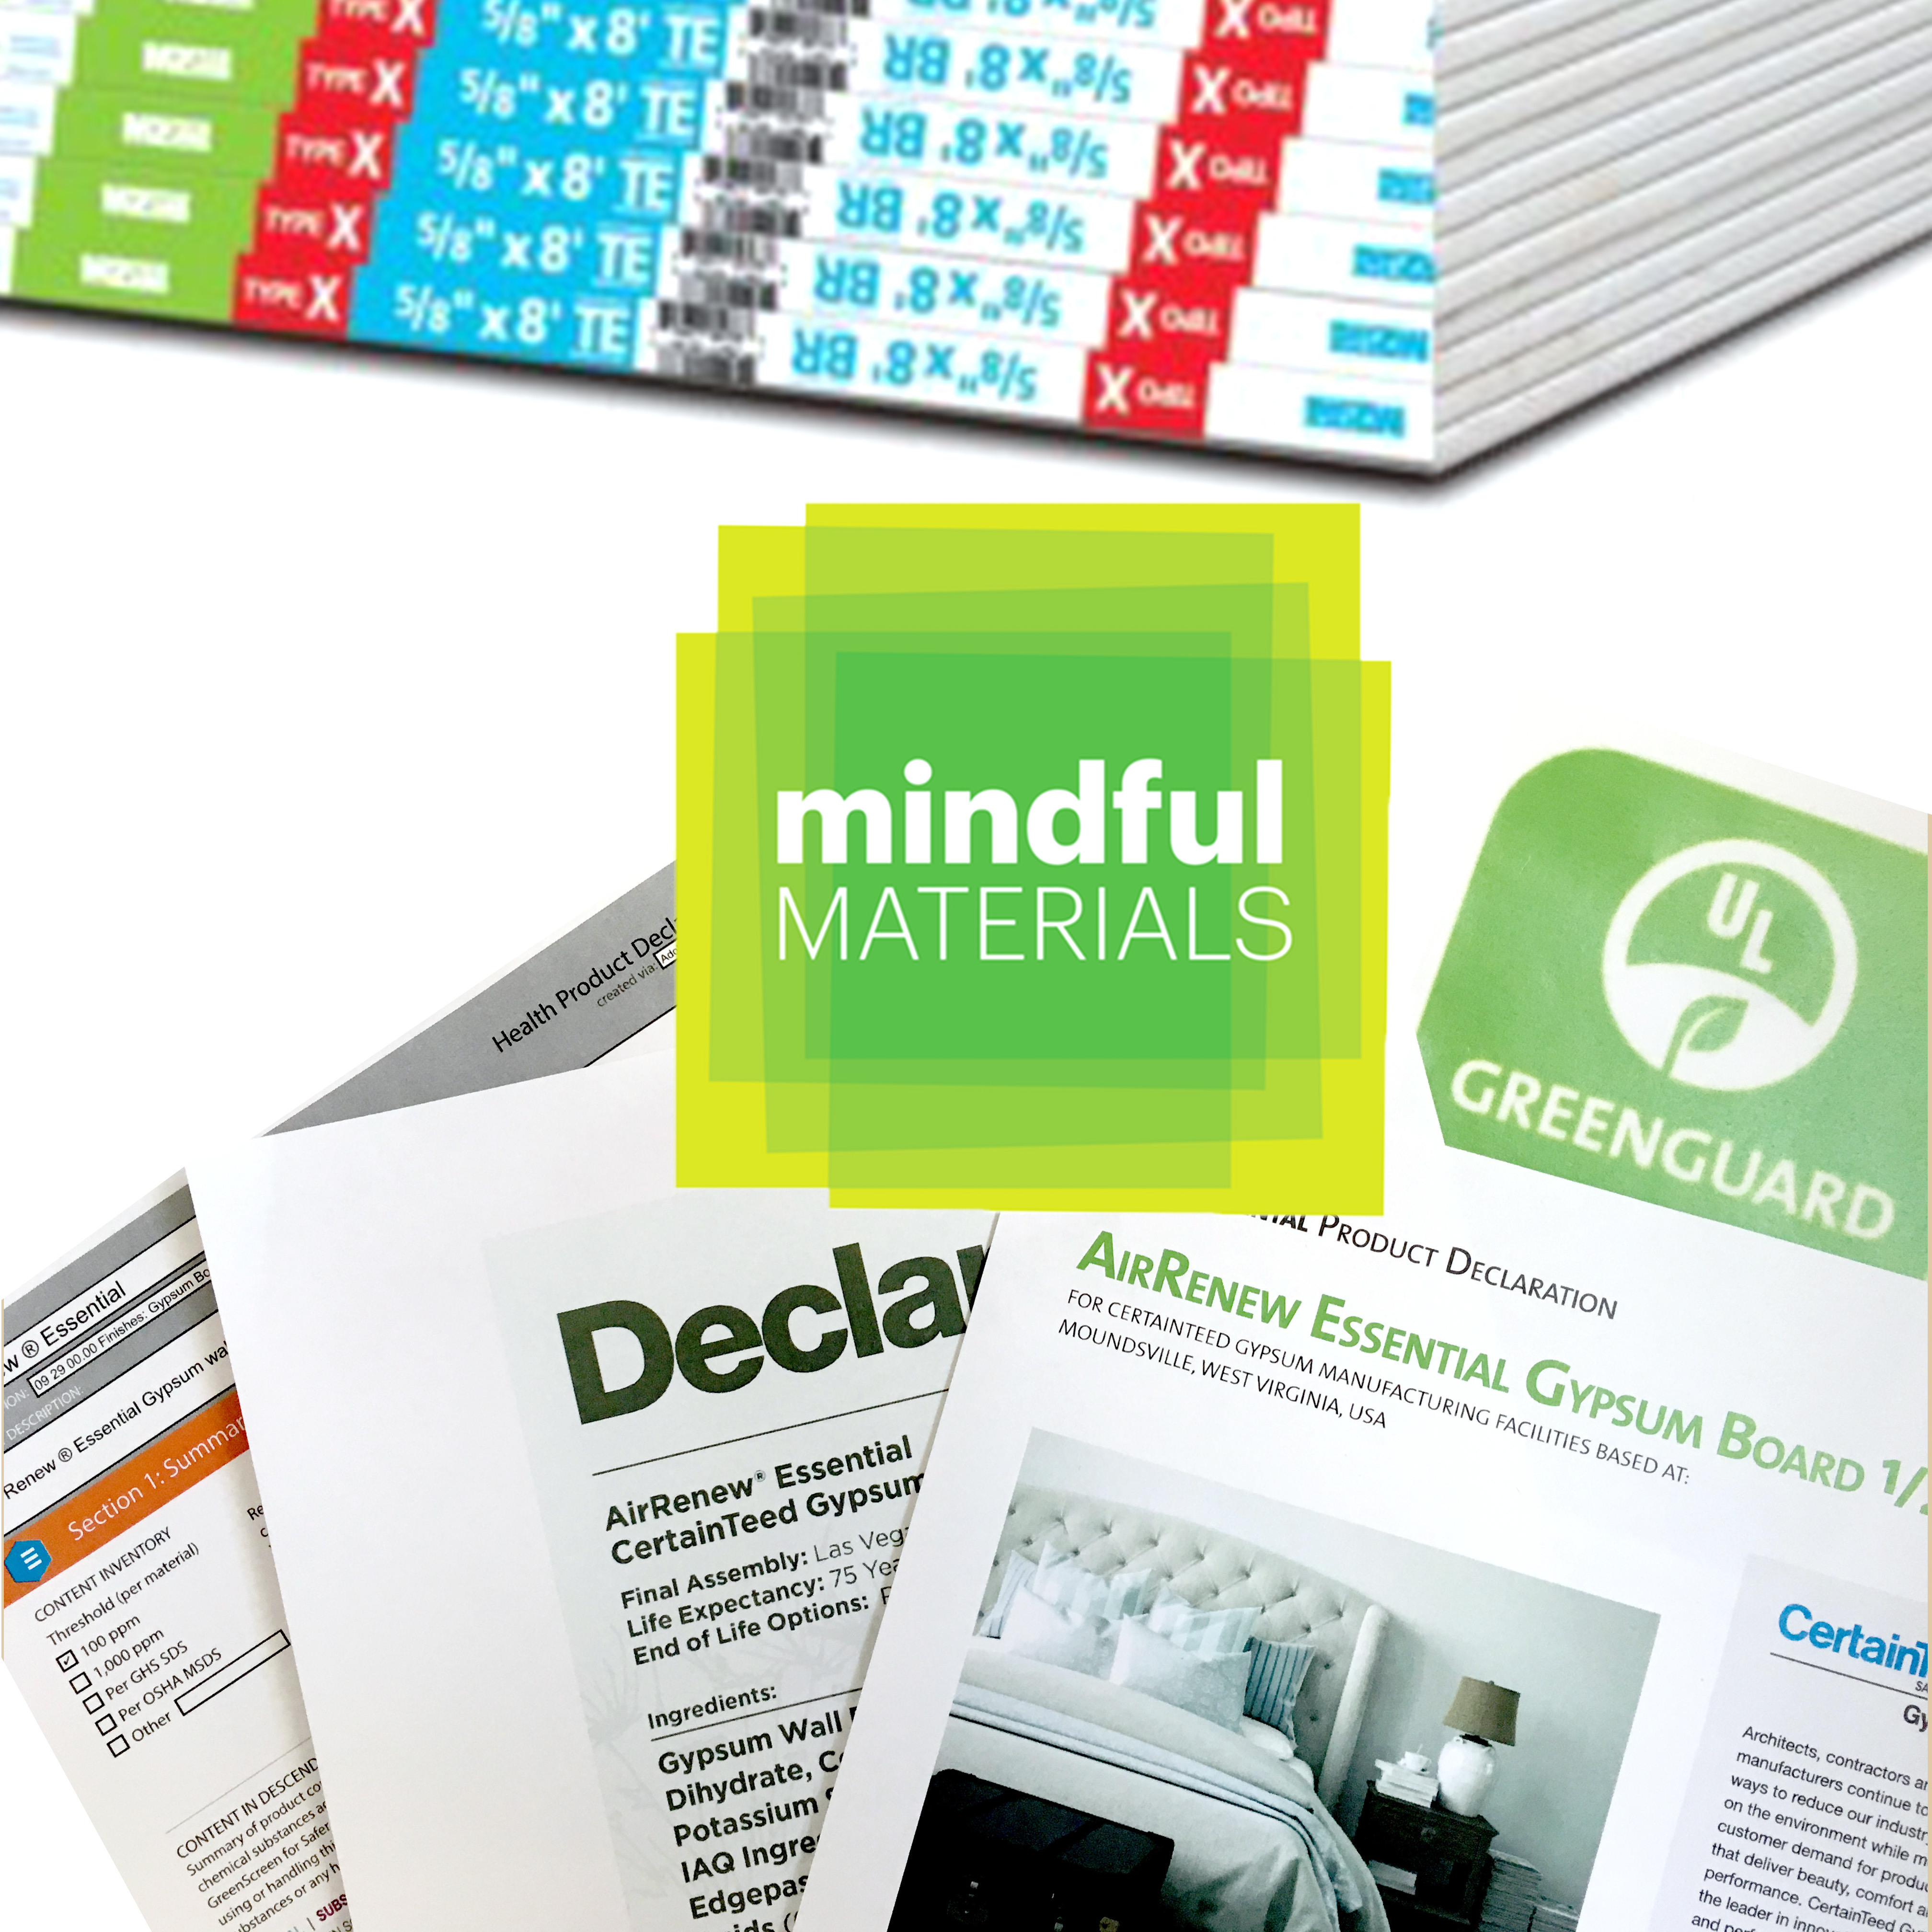 mindful materials